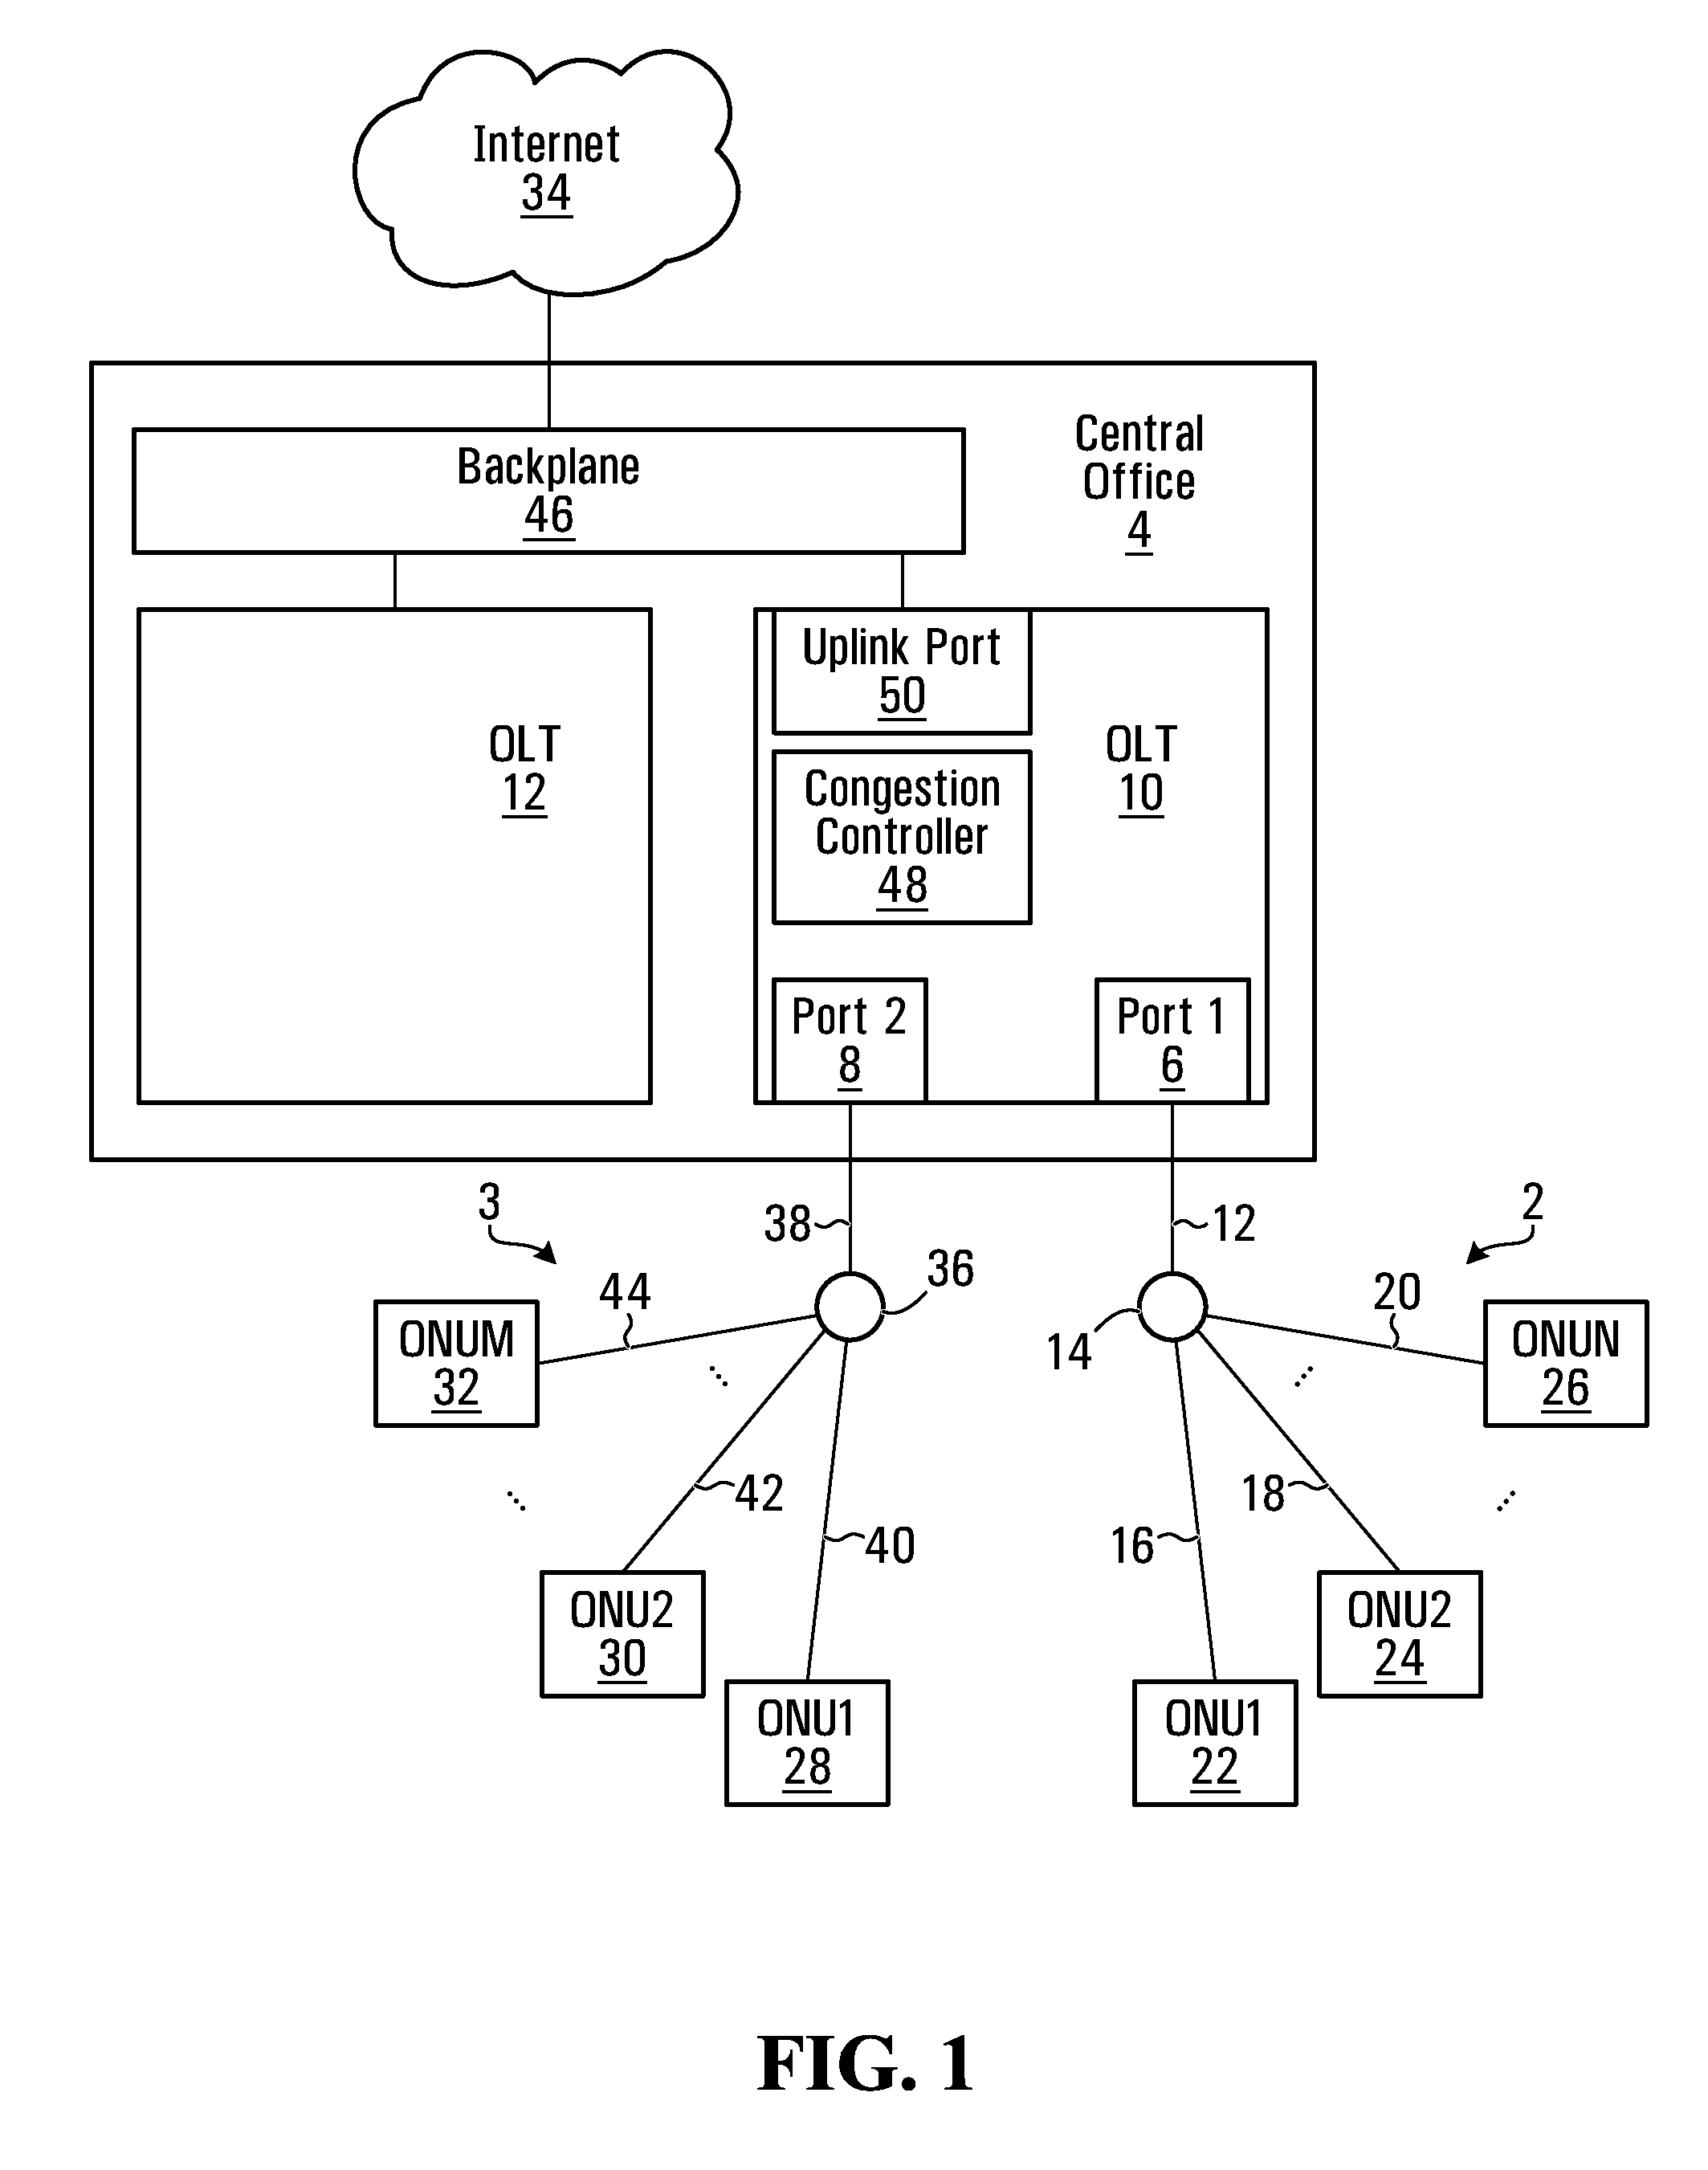 Congestion control in an optical line terminal